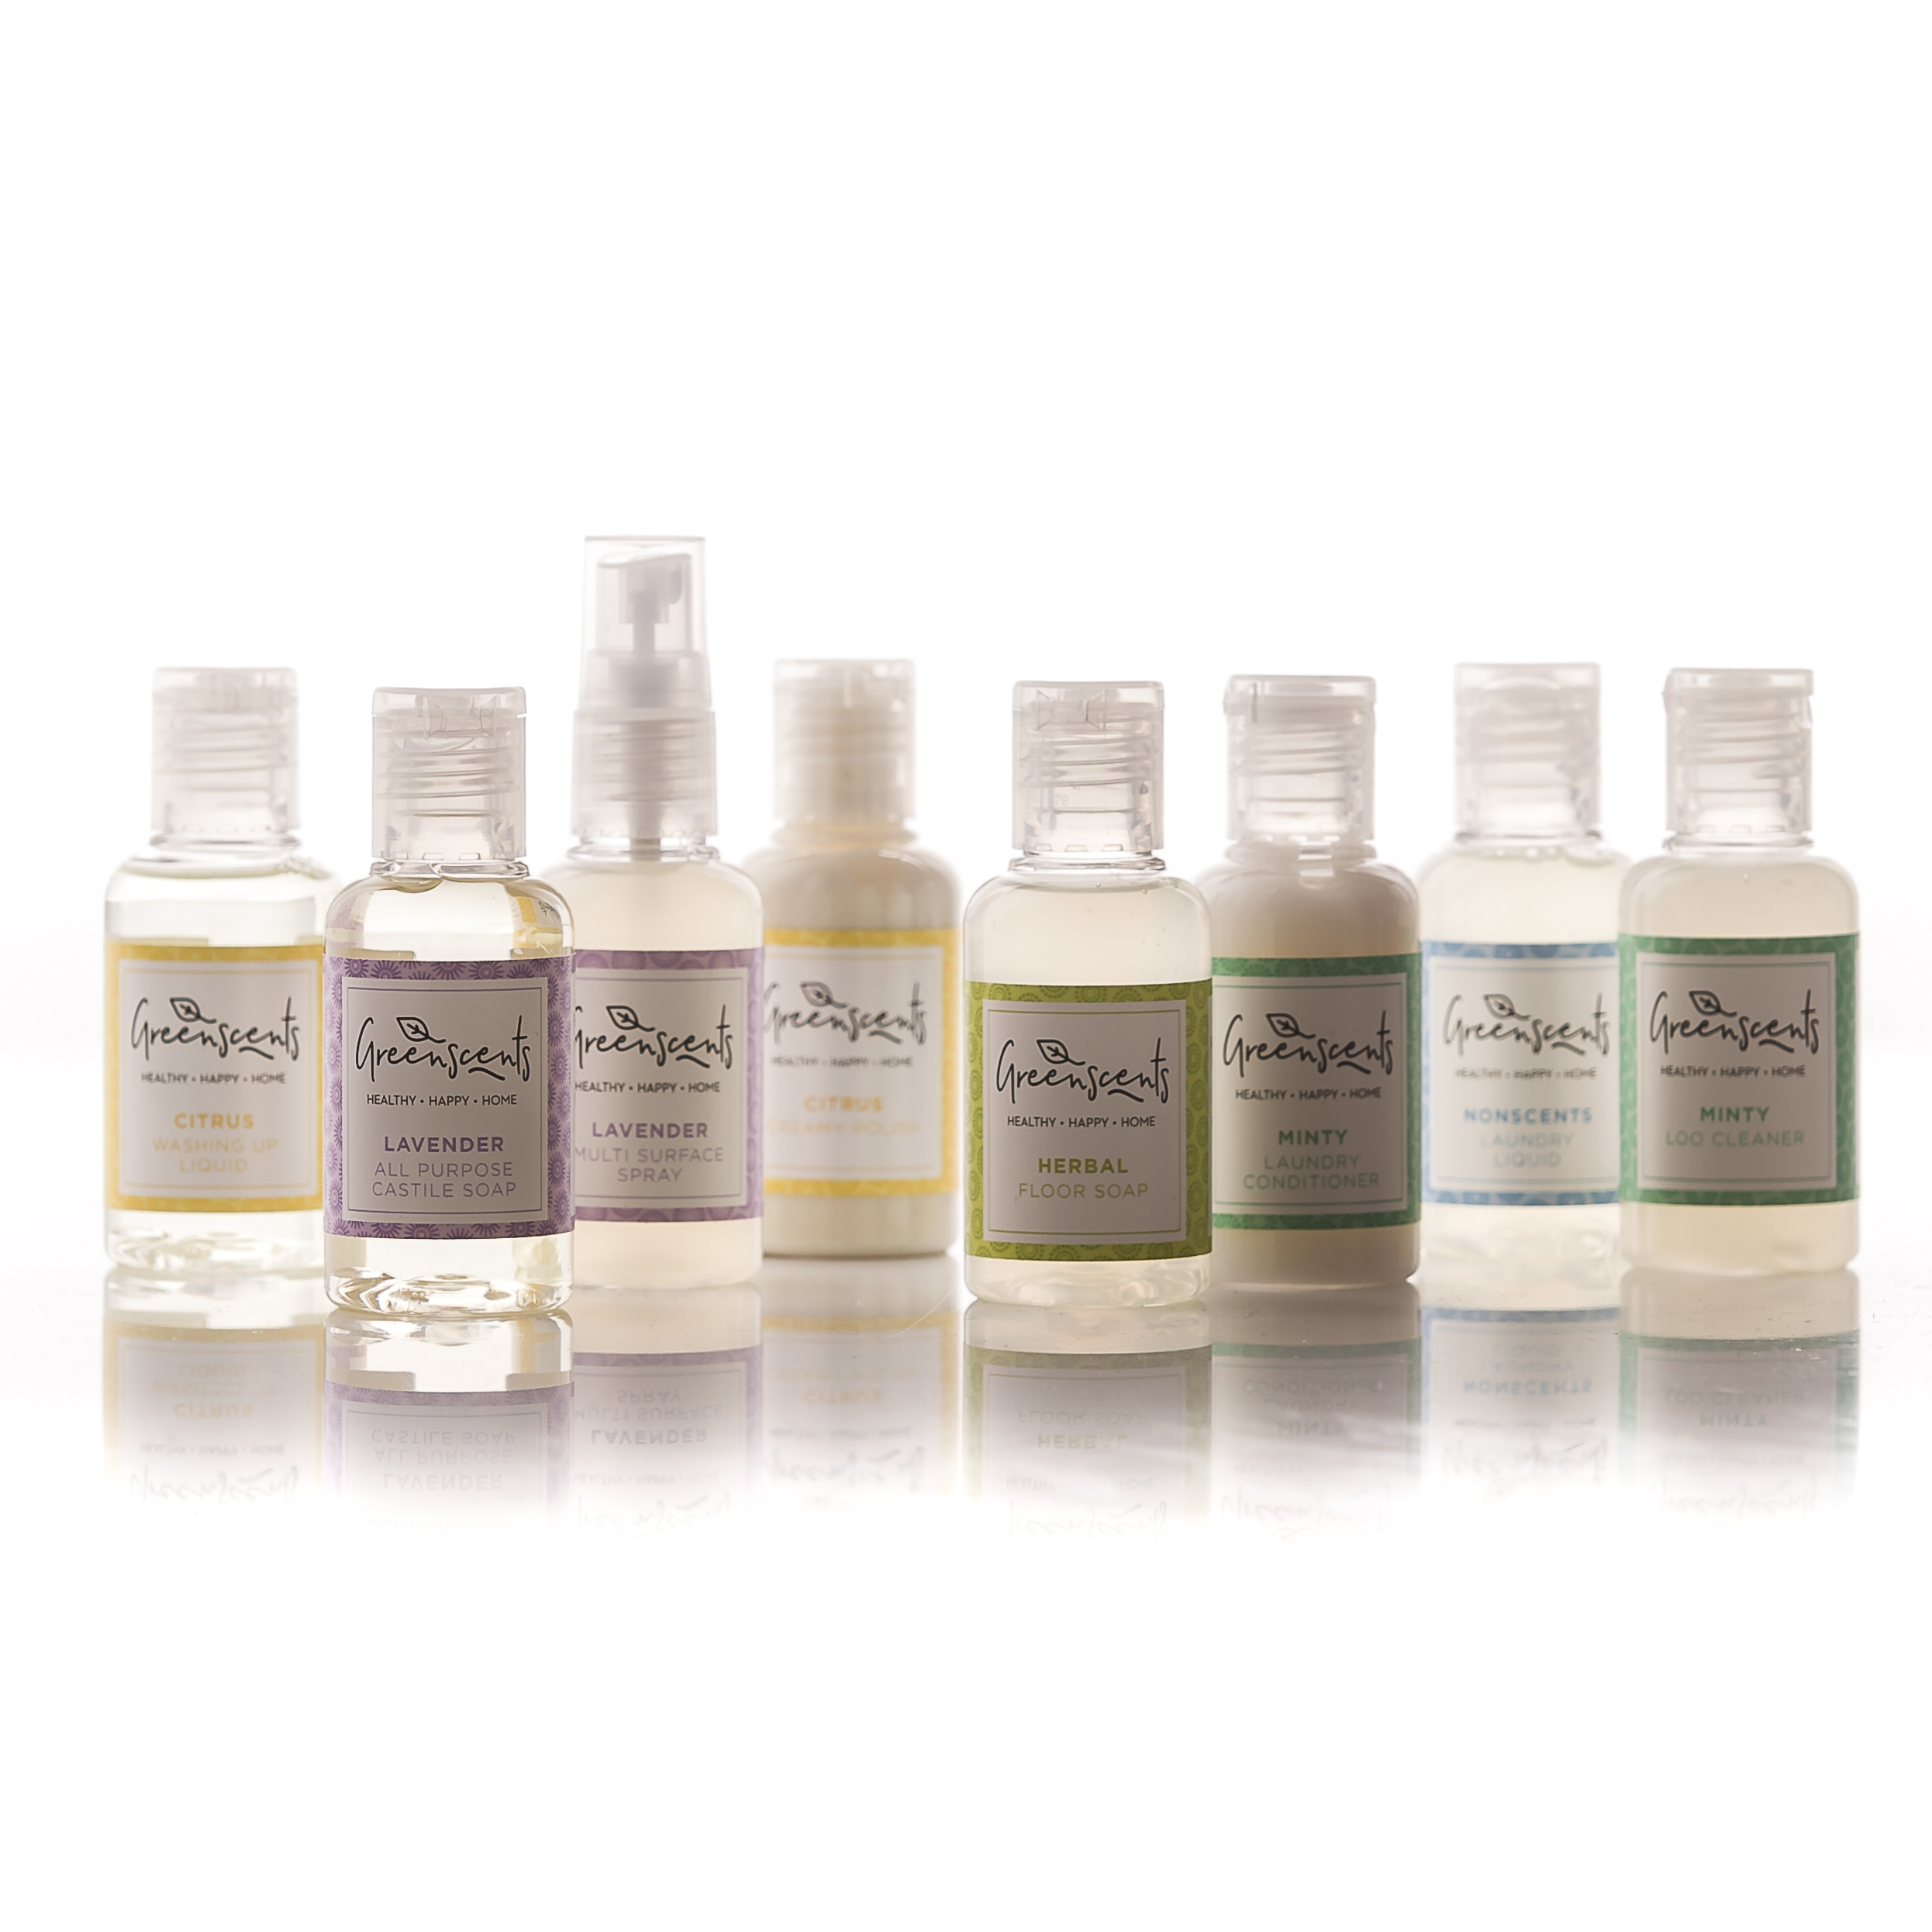 Shop Organic Cleaning And Household Products From Greenscents 